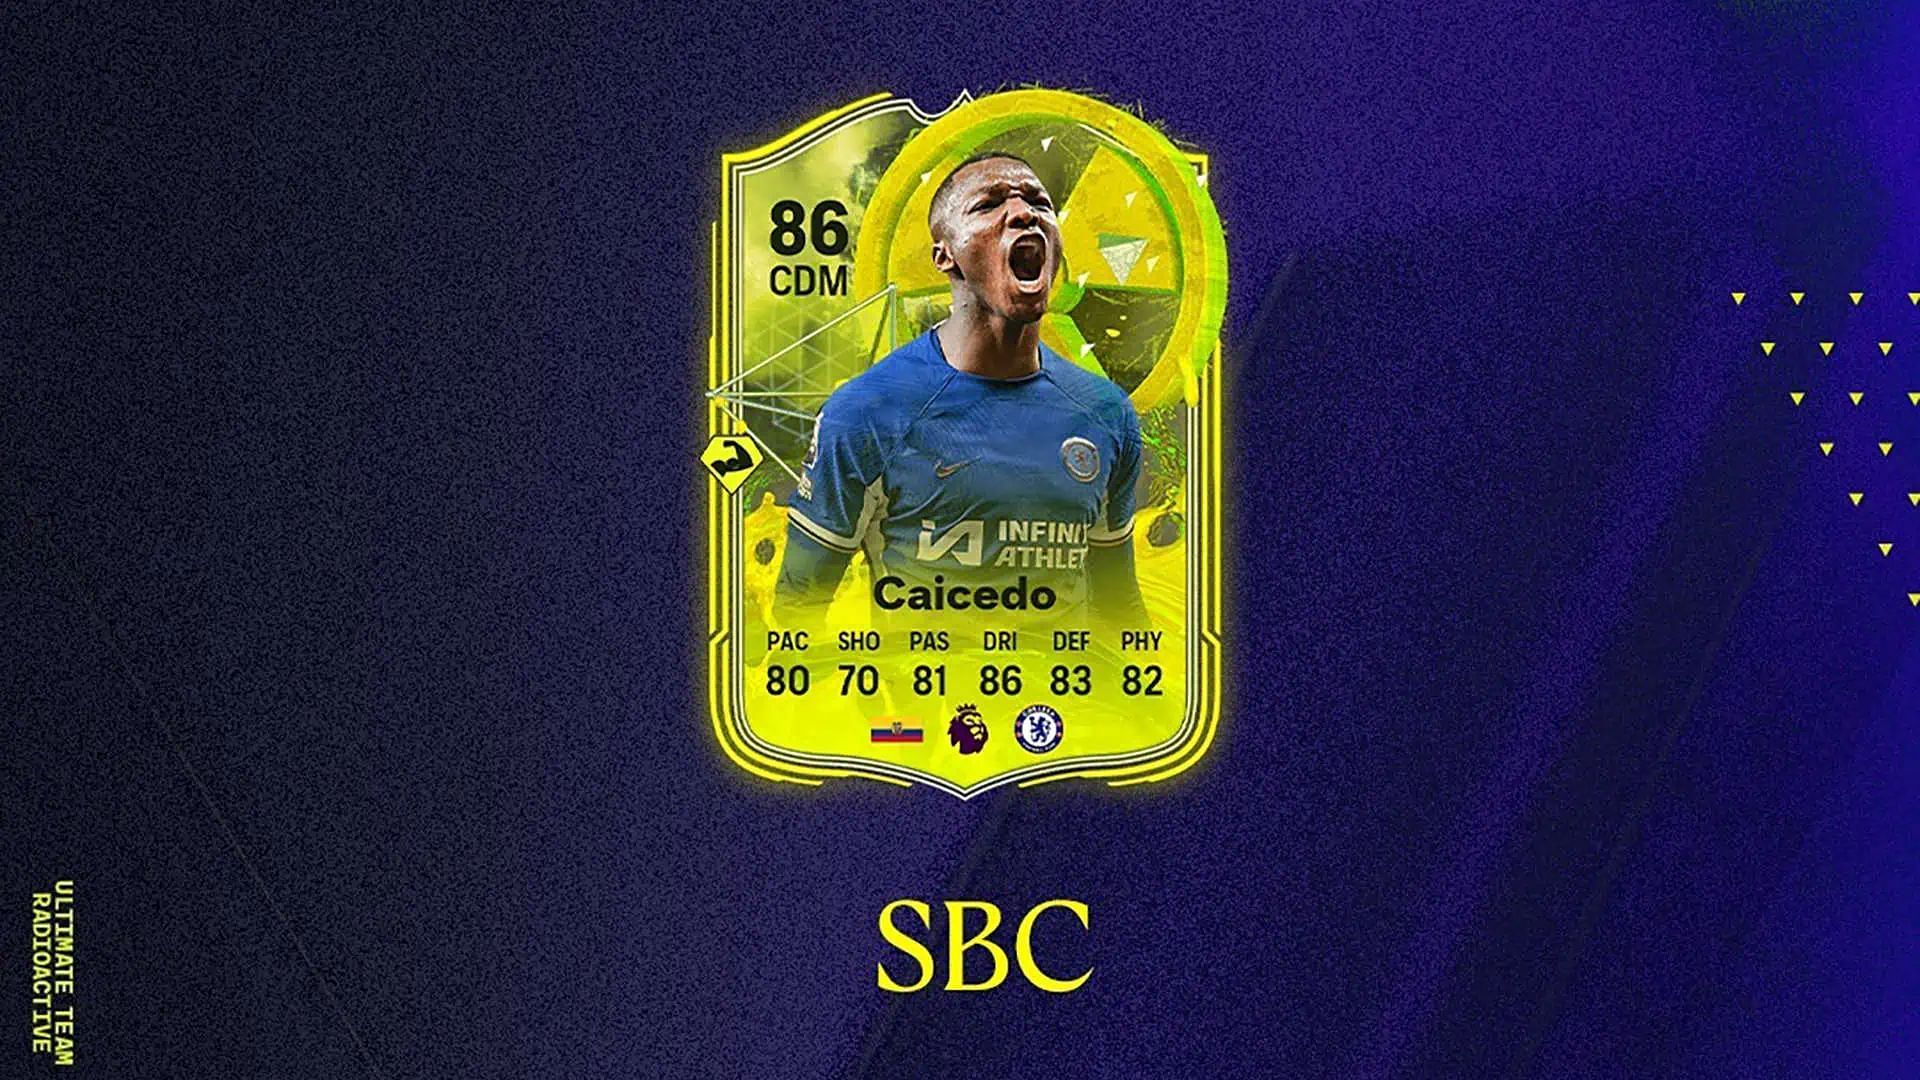 A new Radioactive SBC is now available in EA FC 24 (Image via EA Sports)